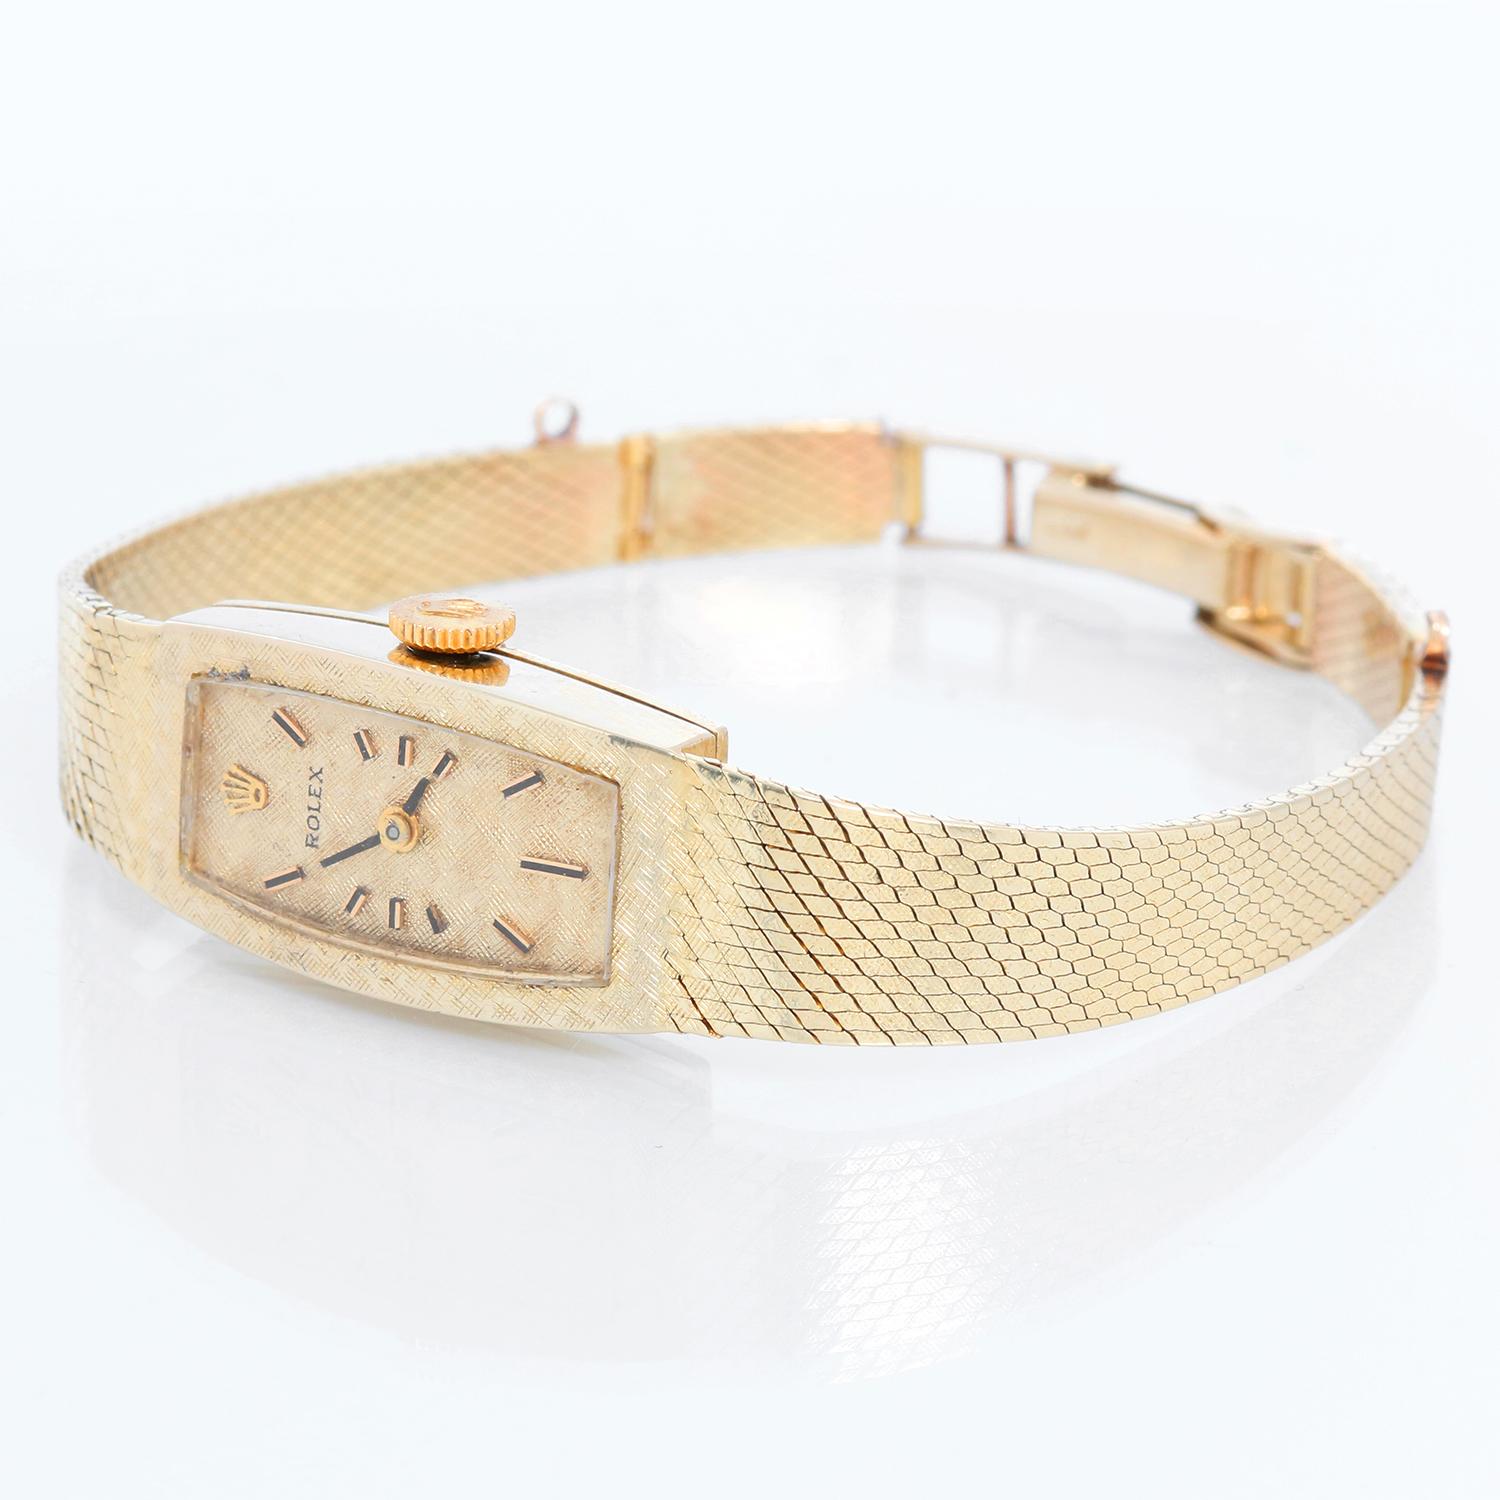 Rolex 14K Yellow Gold Manual Ladies Watch - Manual winding. 14K Yellow gold ( 13 x 23 mm ) Will have engraving removed. Textured champagne dial with stick hour markers. 14K yellow gold mesh bracelet; will fit up to a 6 inch wrist. Pre-owned with